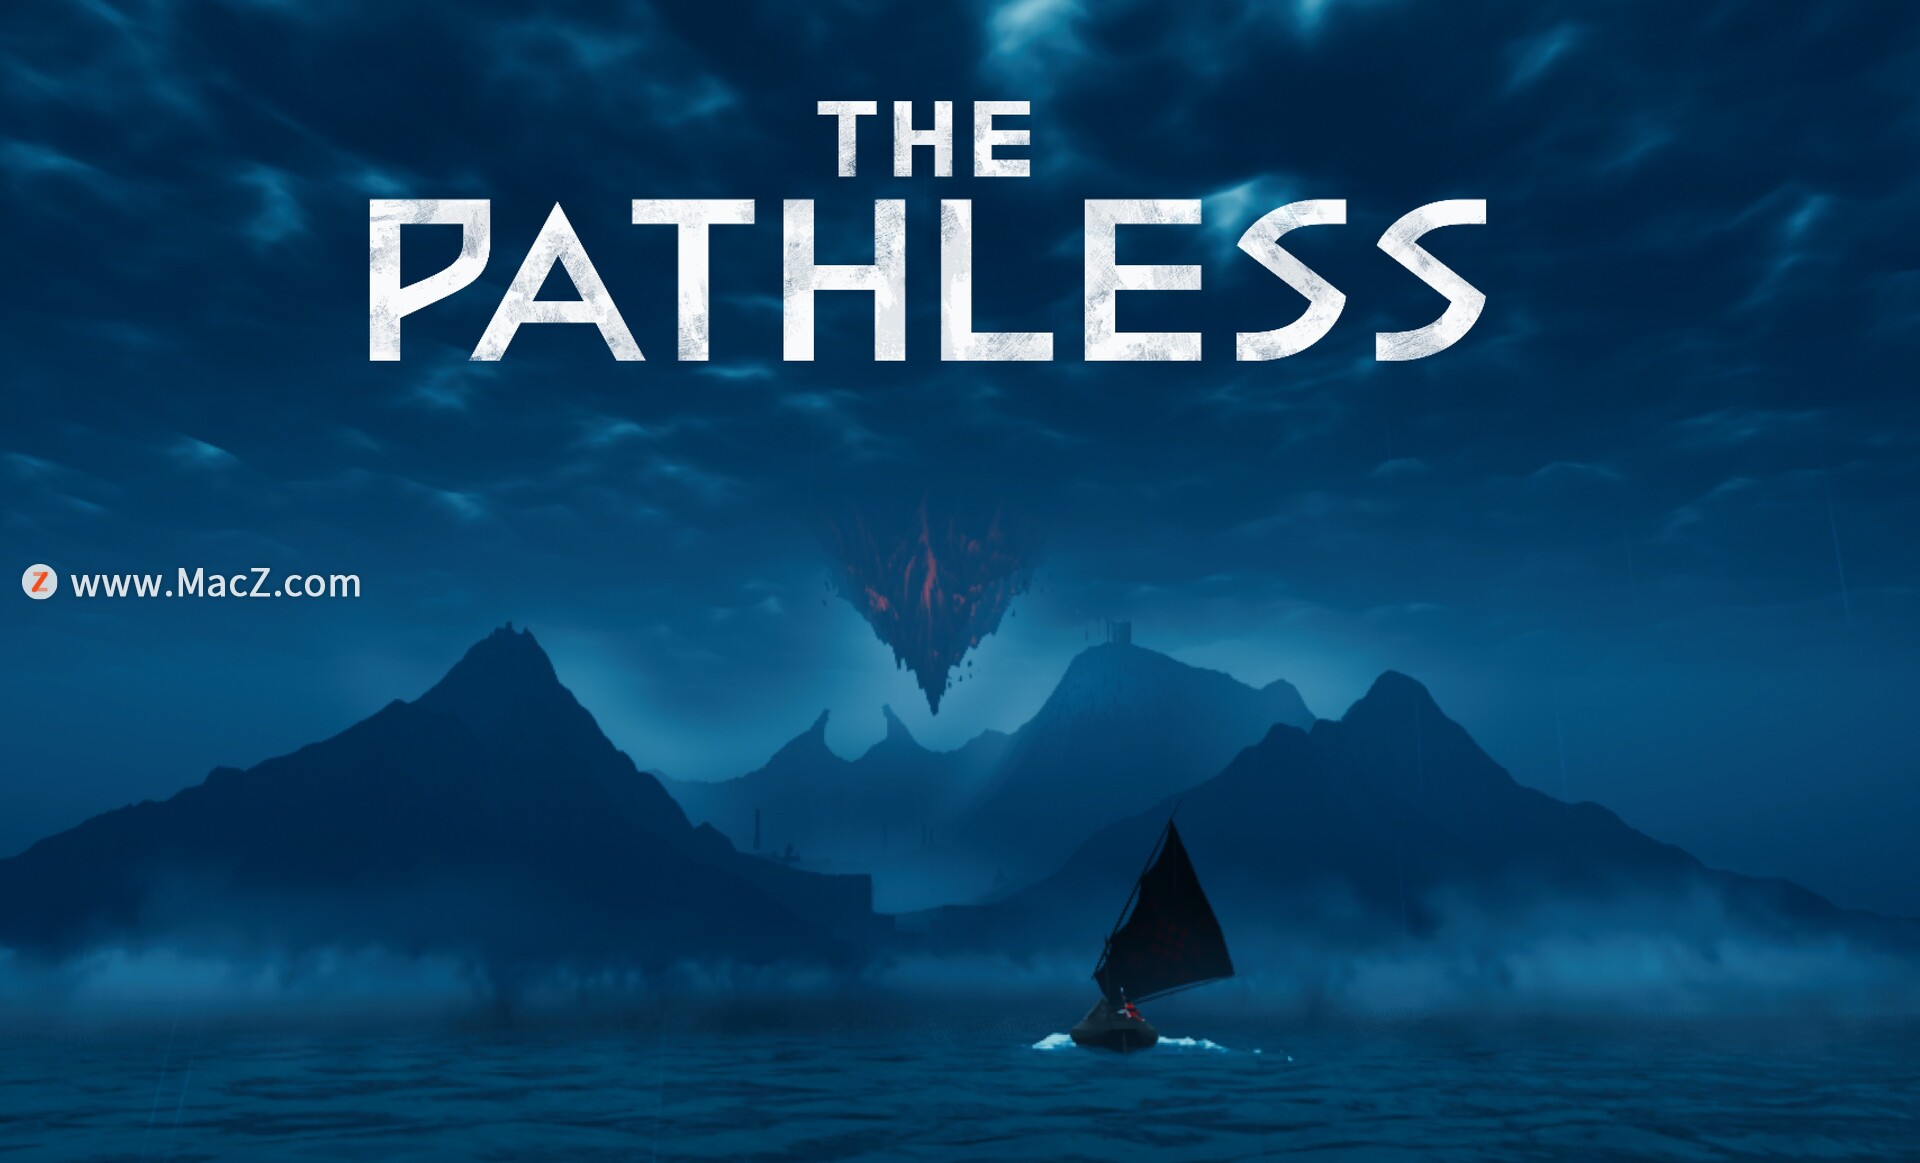 The Pathless for Mac(无路之旅探险游戏)